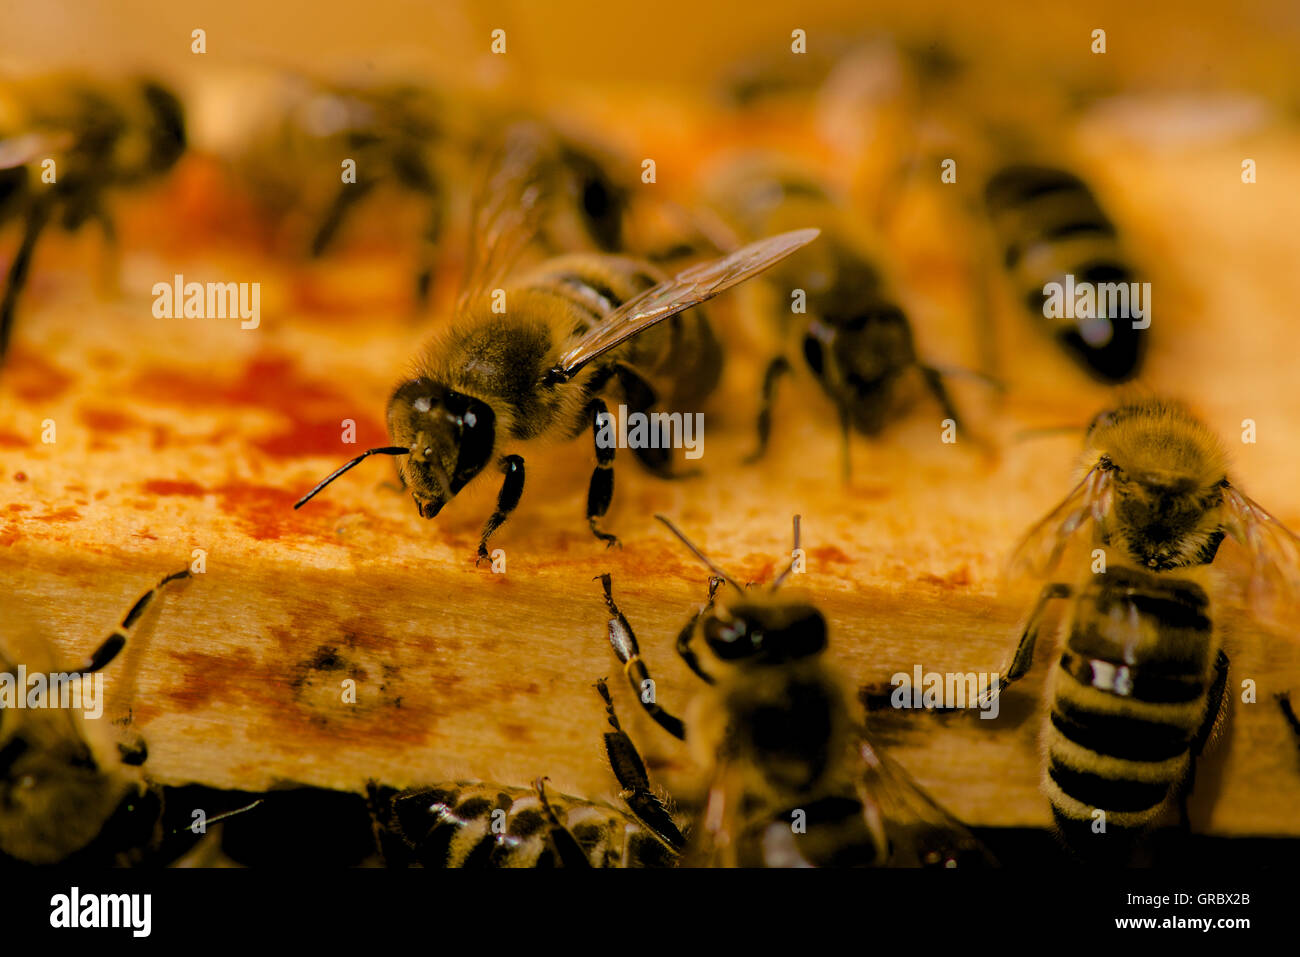 Bustling Bees On Honeycomb Frames Stock Photo